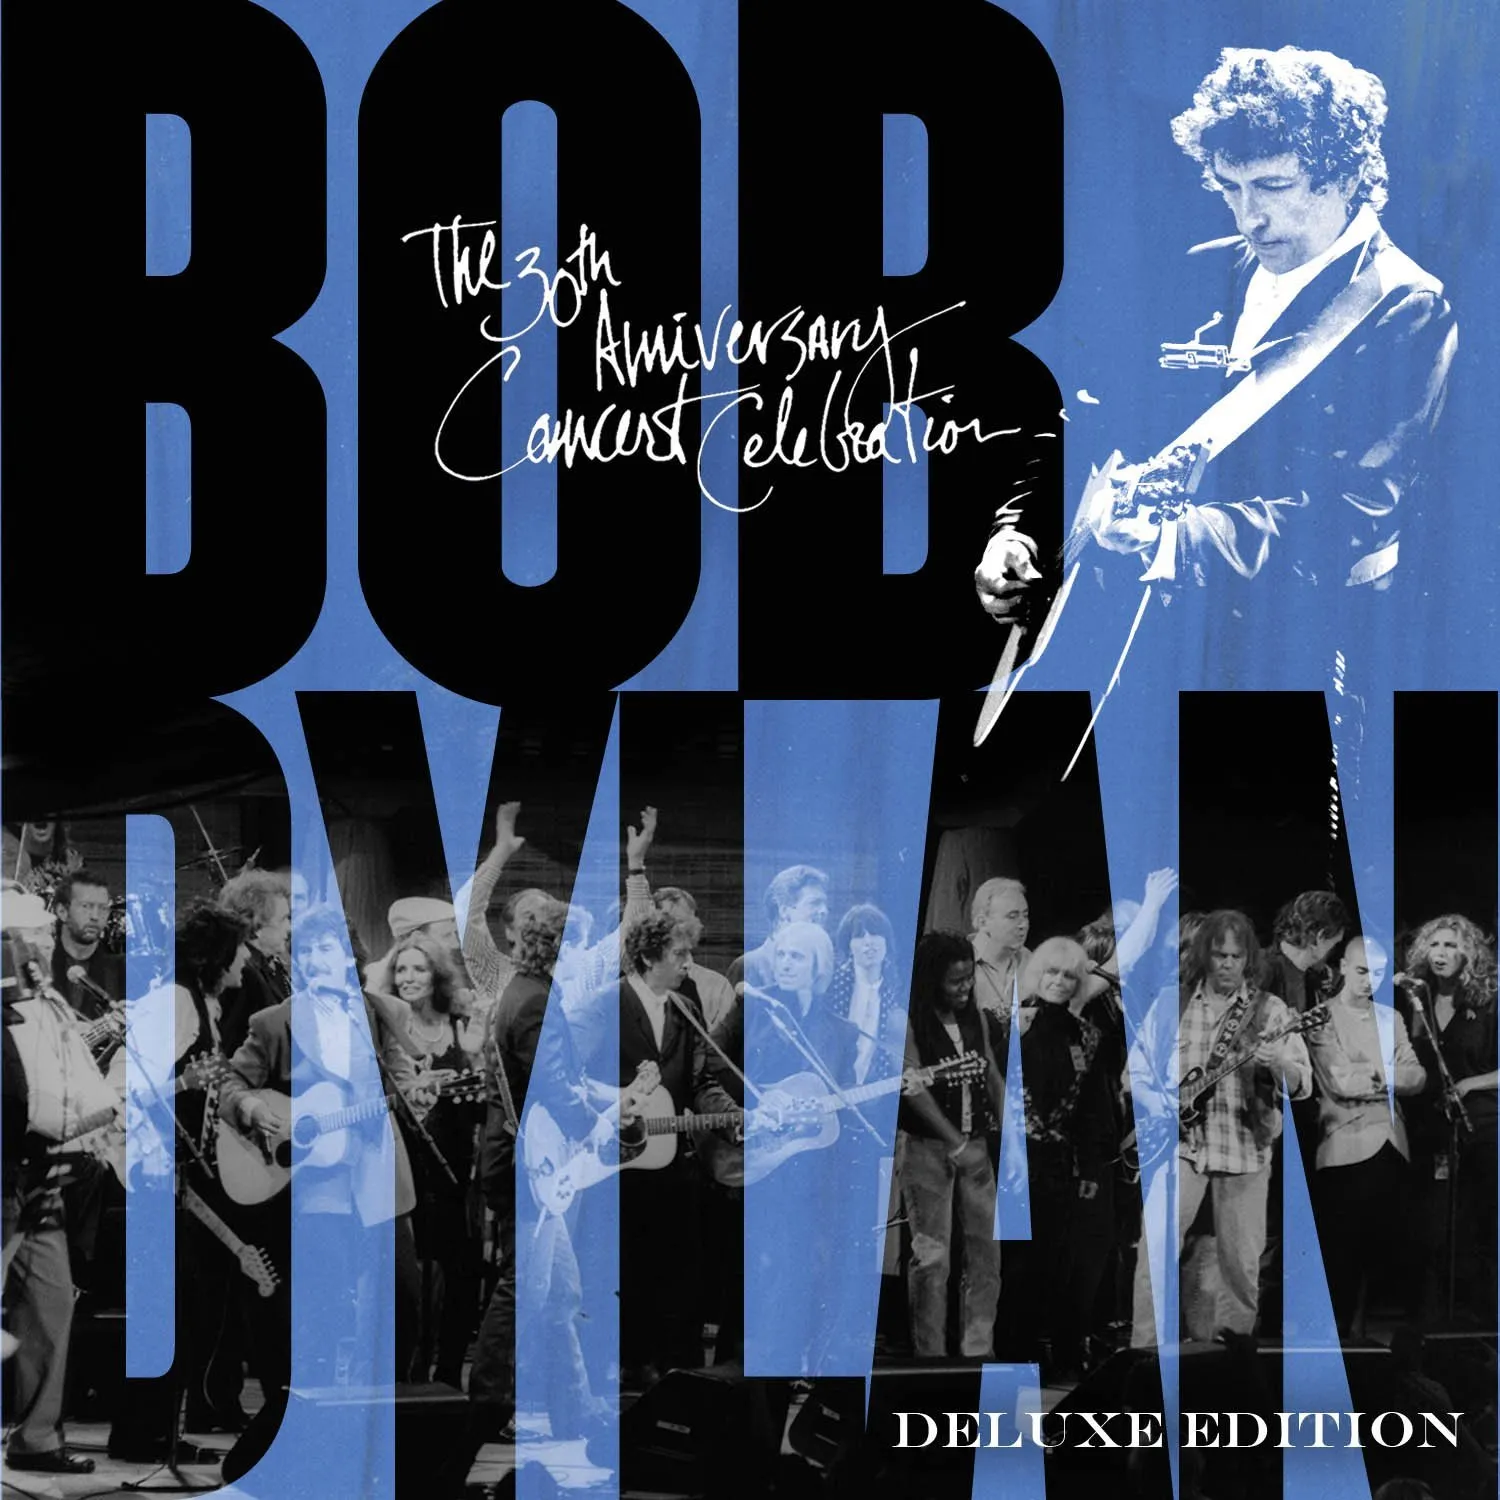 Bob Dylan: The 30th Anniversary Concert Celebration- Deluxe Edition to be Released on DVD and Blu-Ray